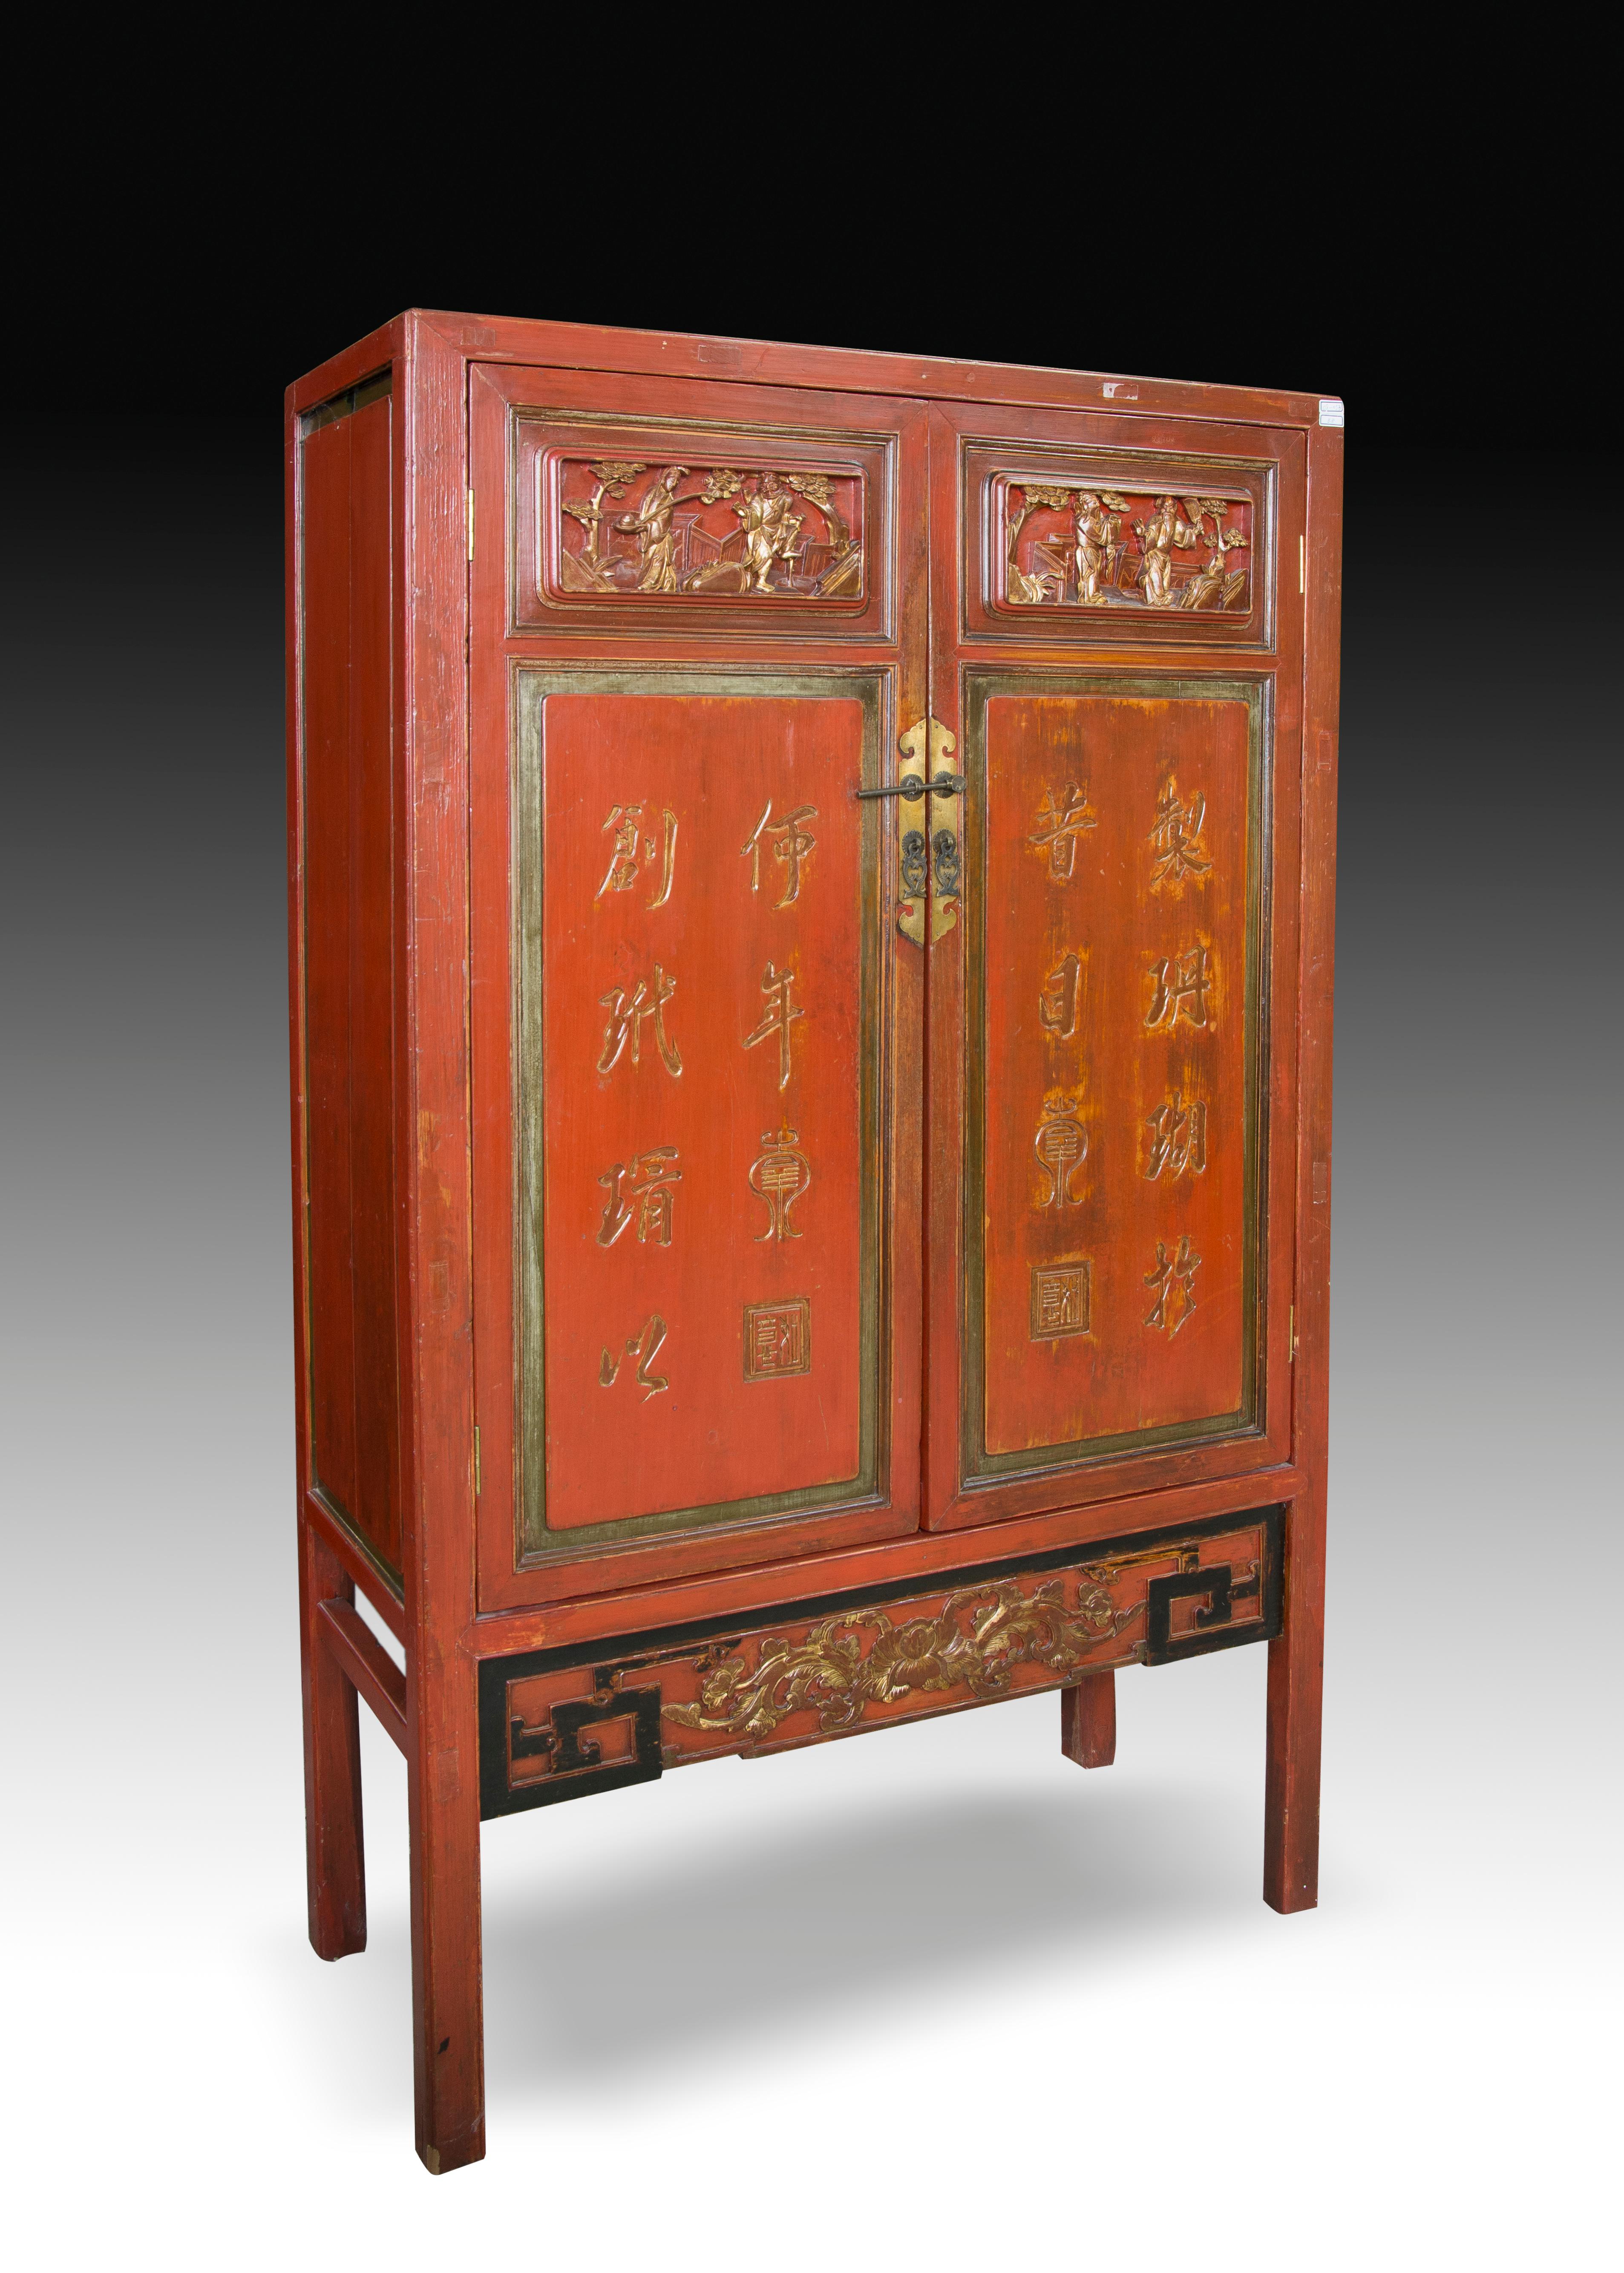 Tall wardrobe with two doors to the front decorated with Chinese characters and figurative scenes on them, and with a band below with geometric patterns in black enhancing a floral composition. Inside, there are three shelves and two drawers with